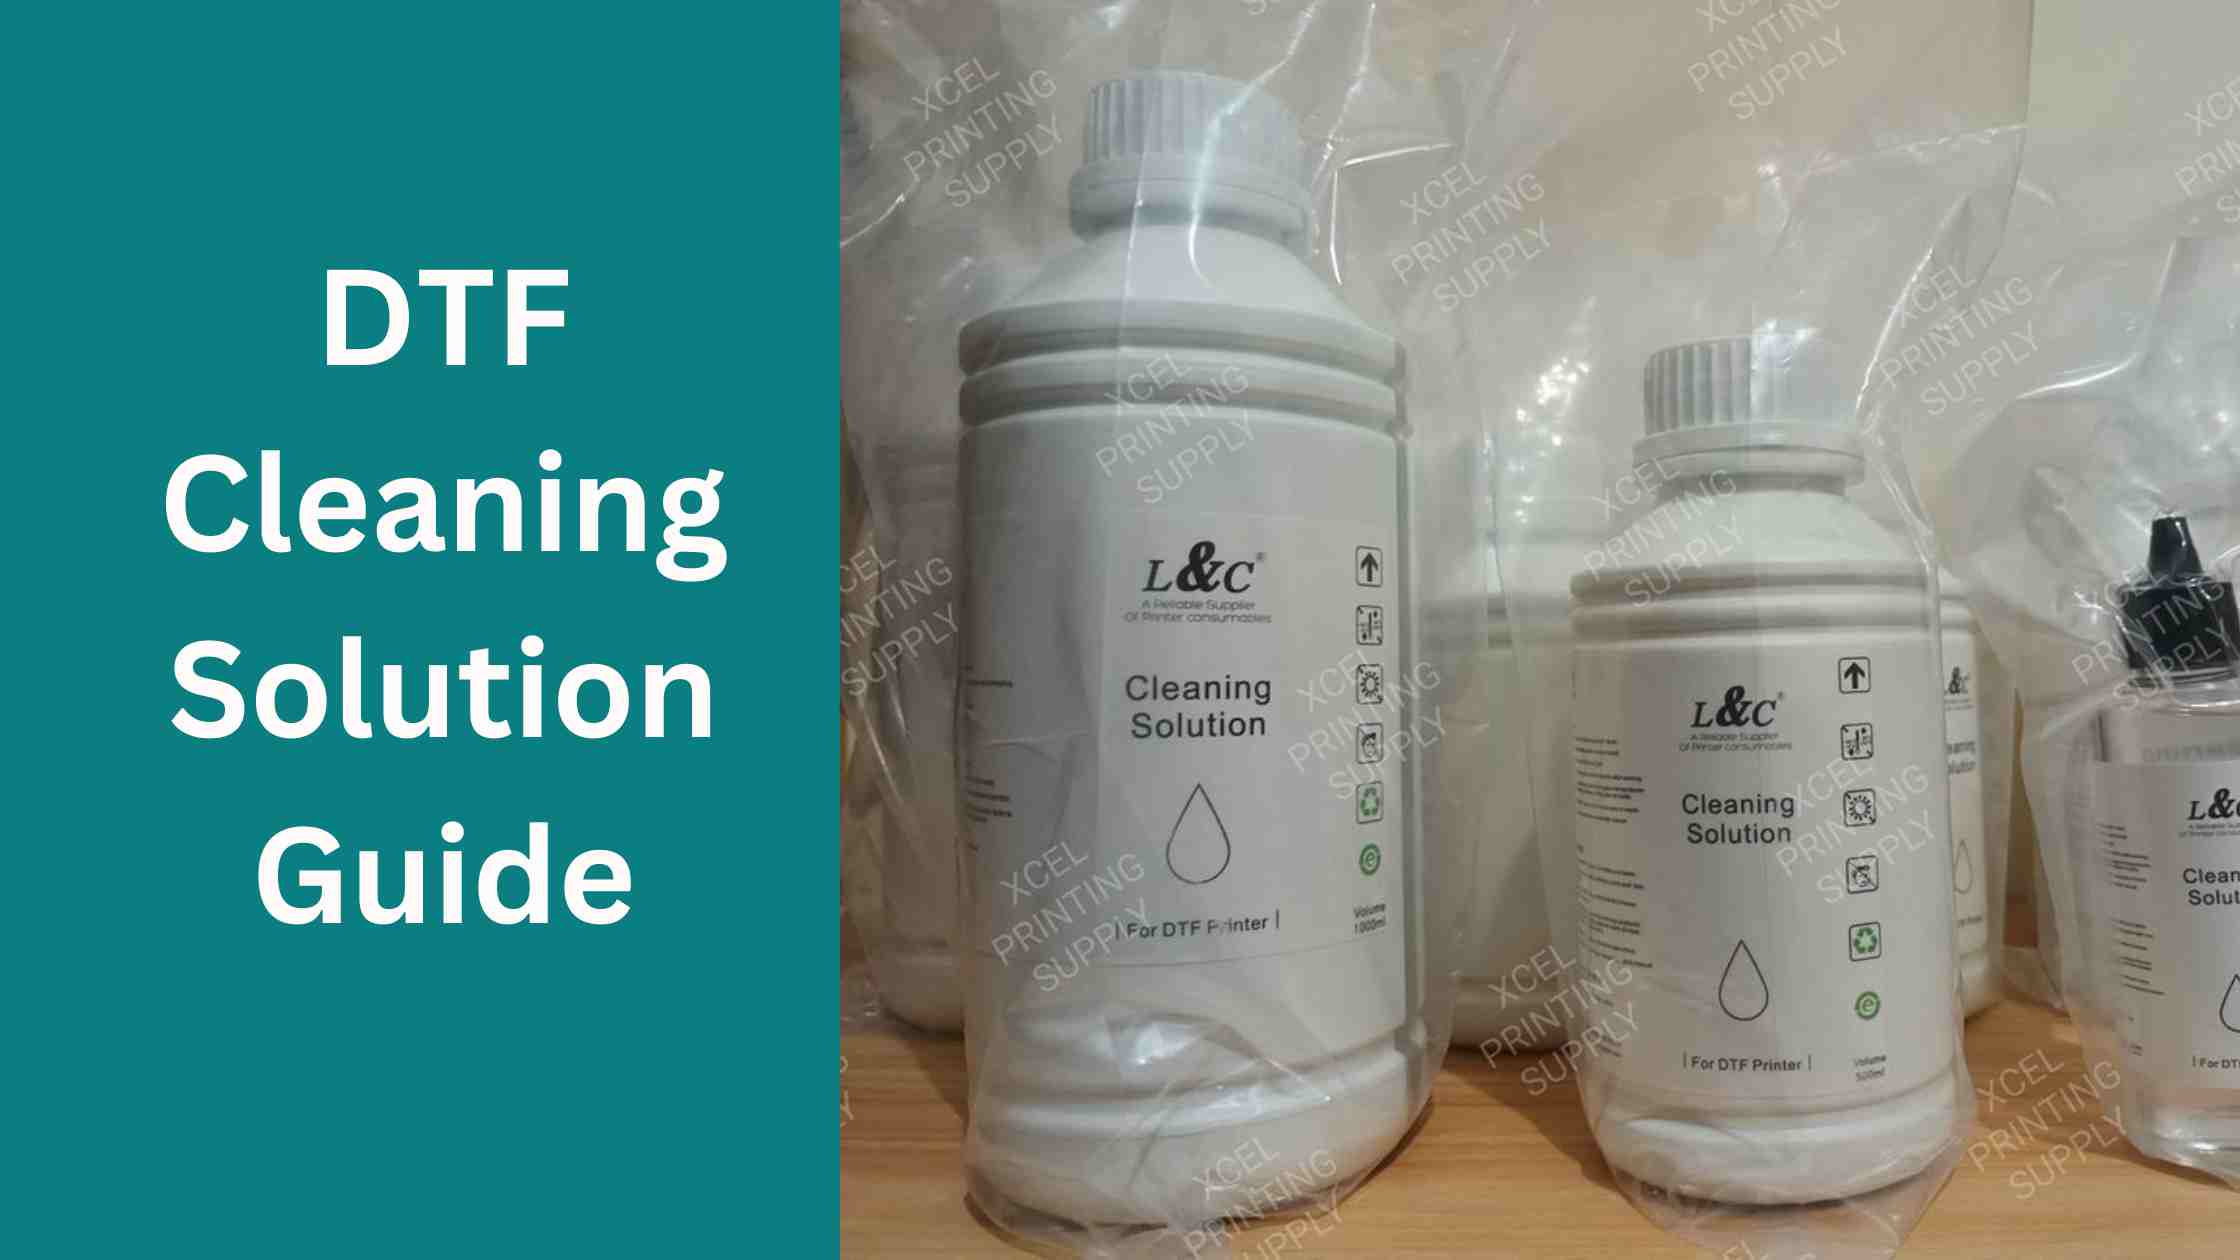 DTF Cleaning Solutions Kit